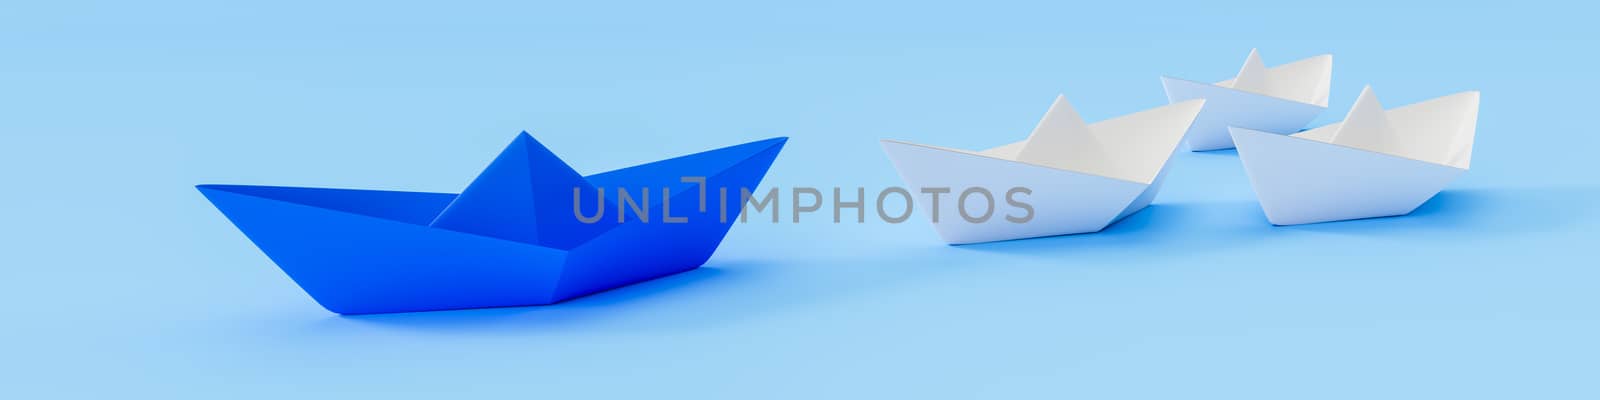 3d illustration of a blue boat and some white